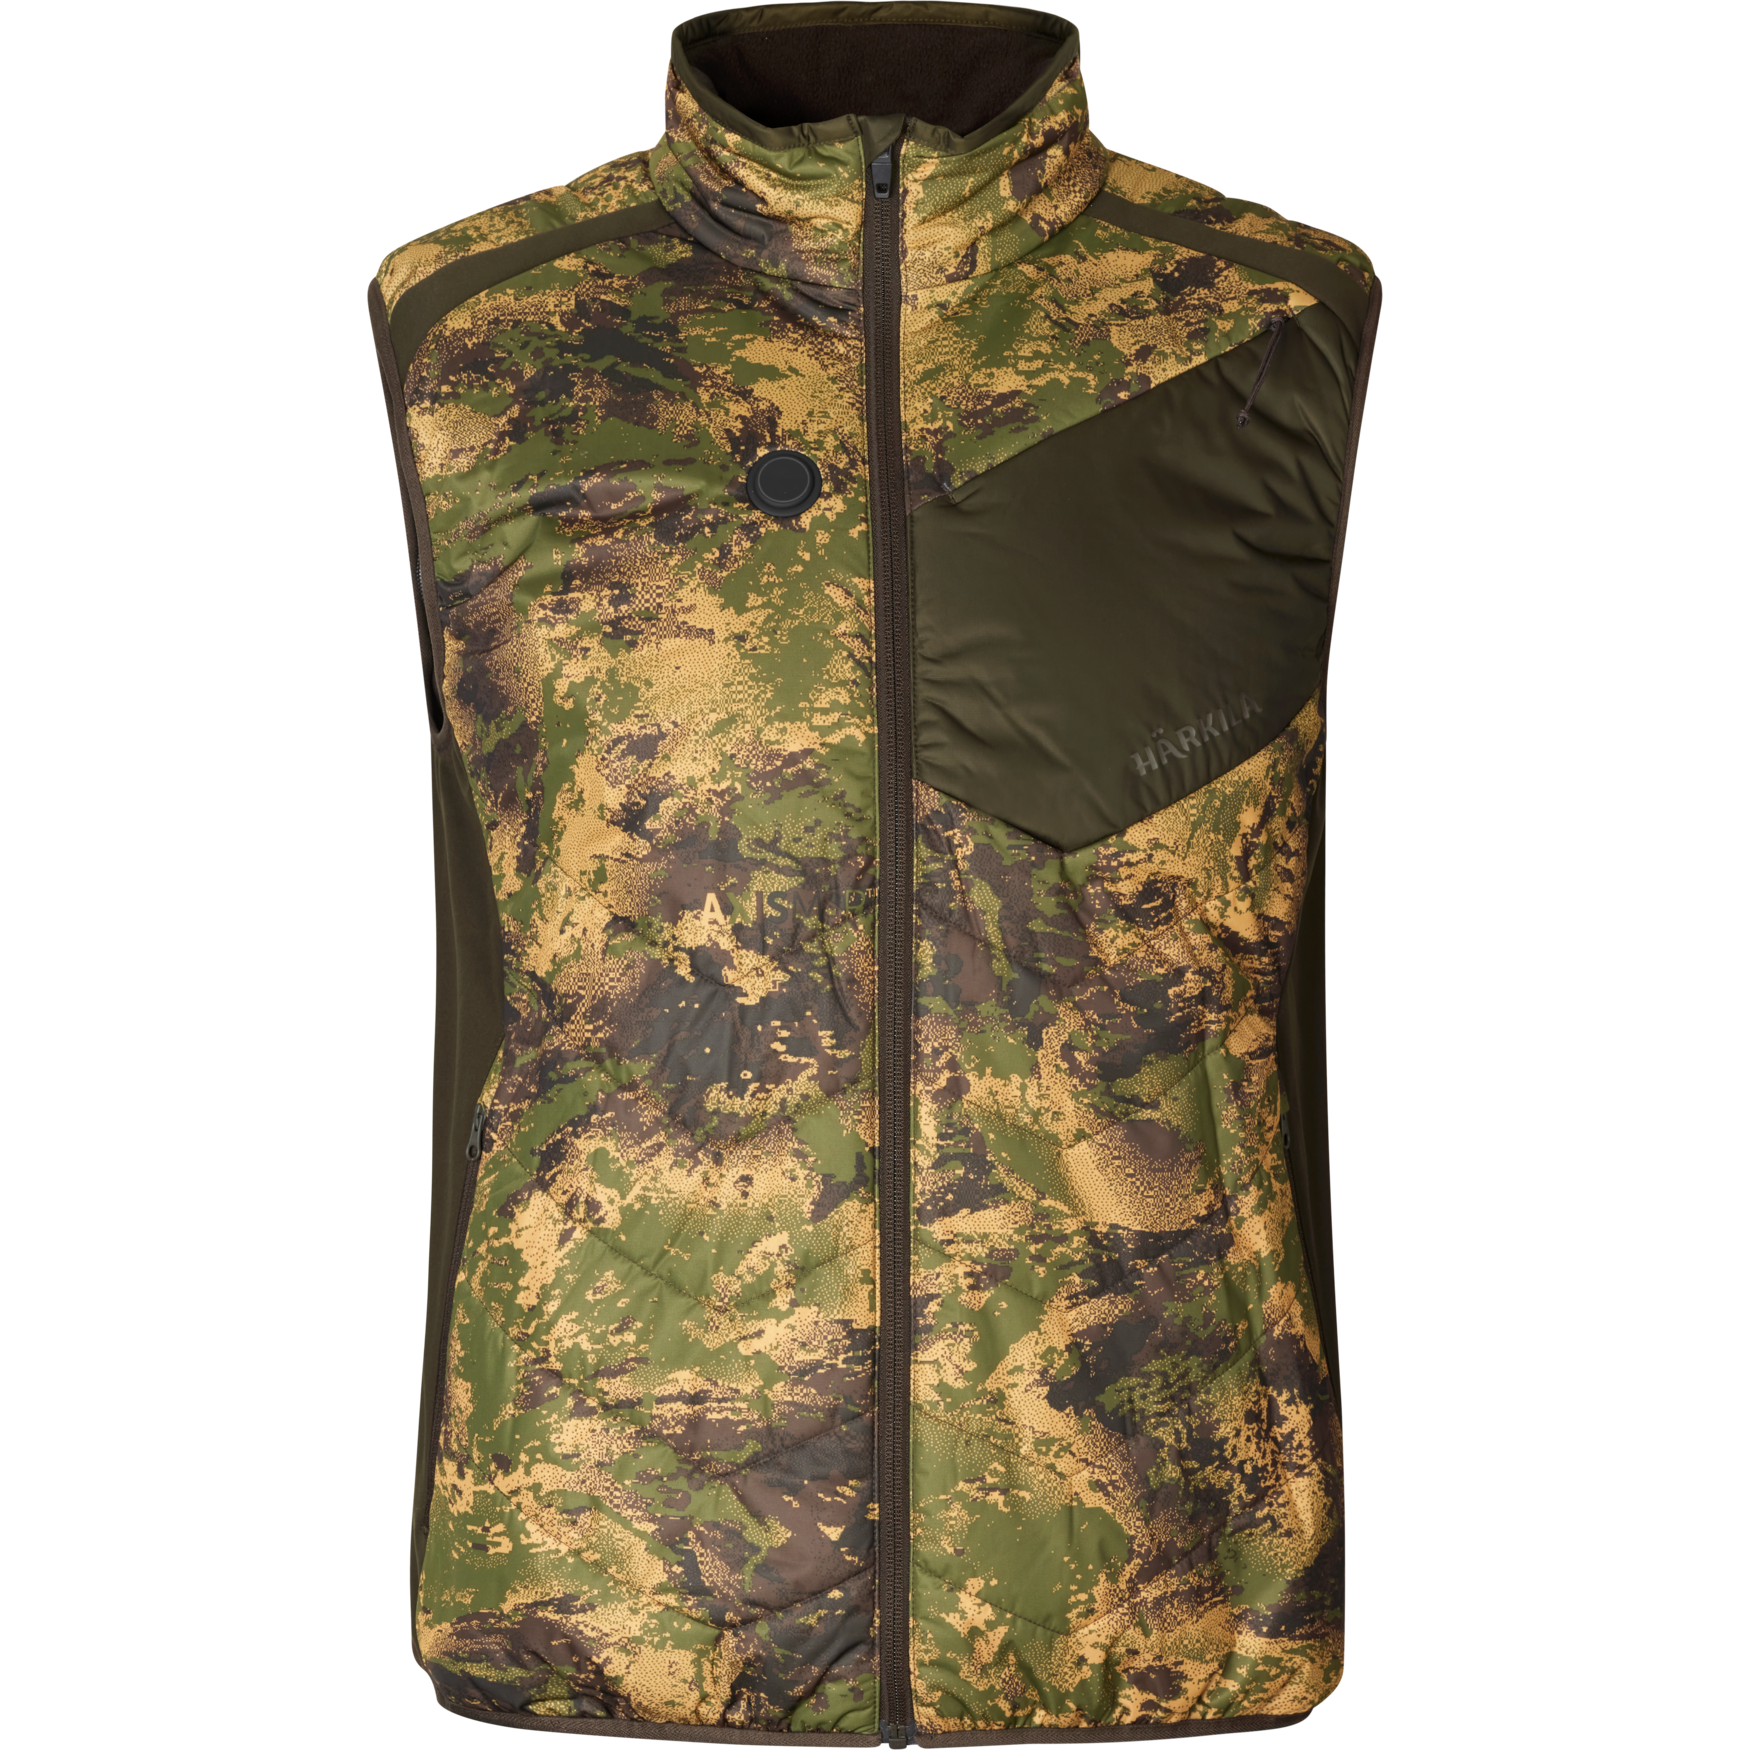 gilets chauffants camouflages